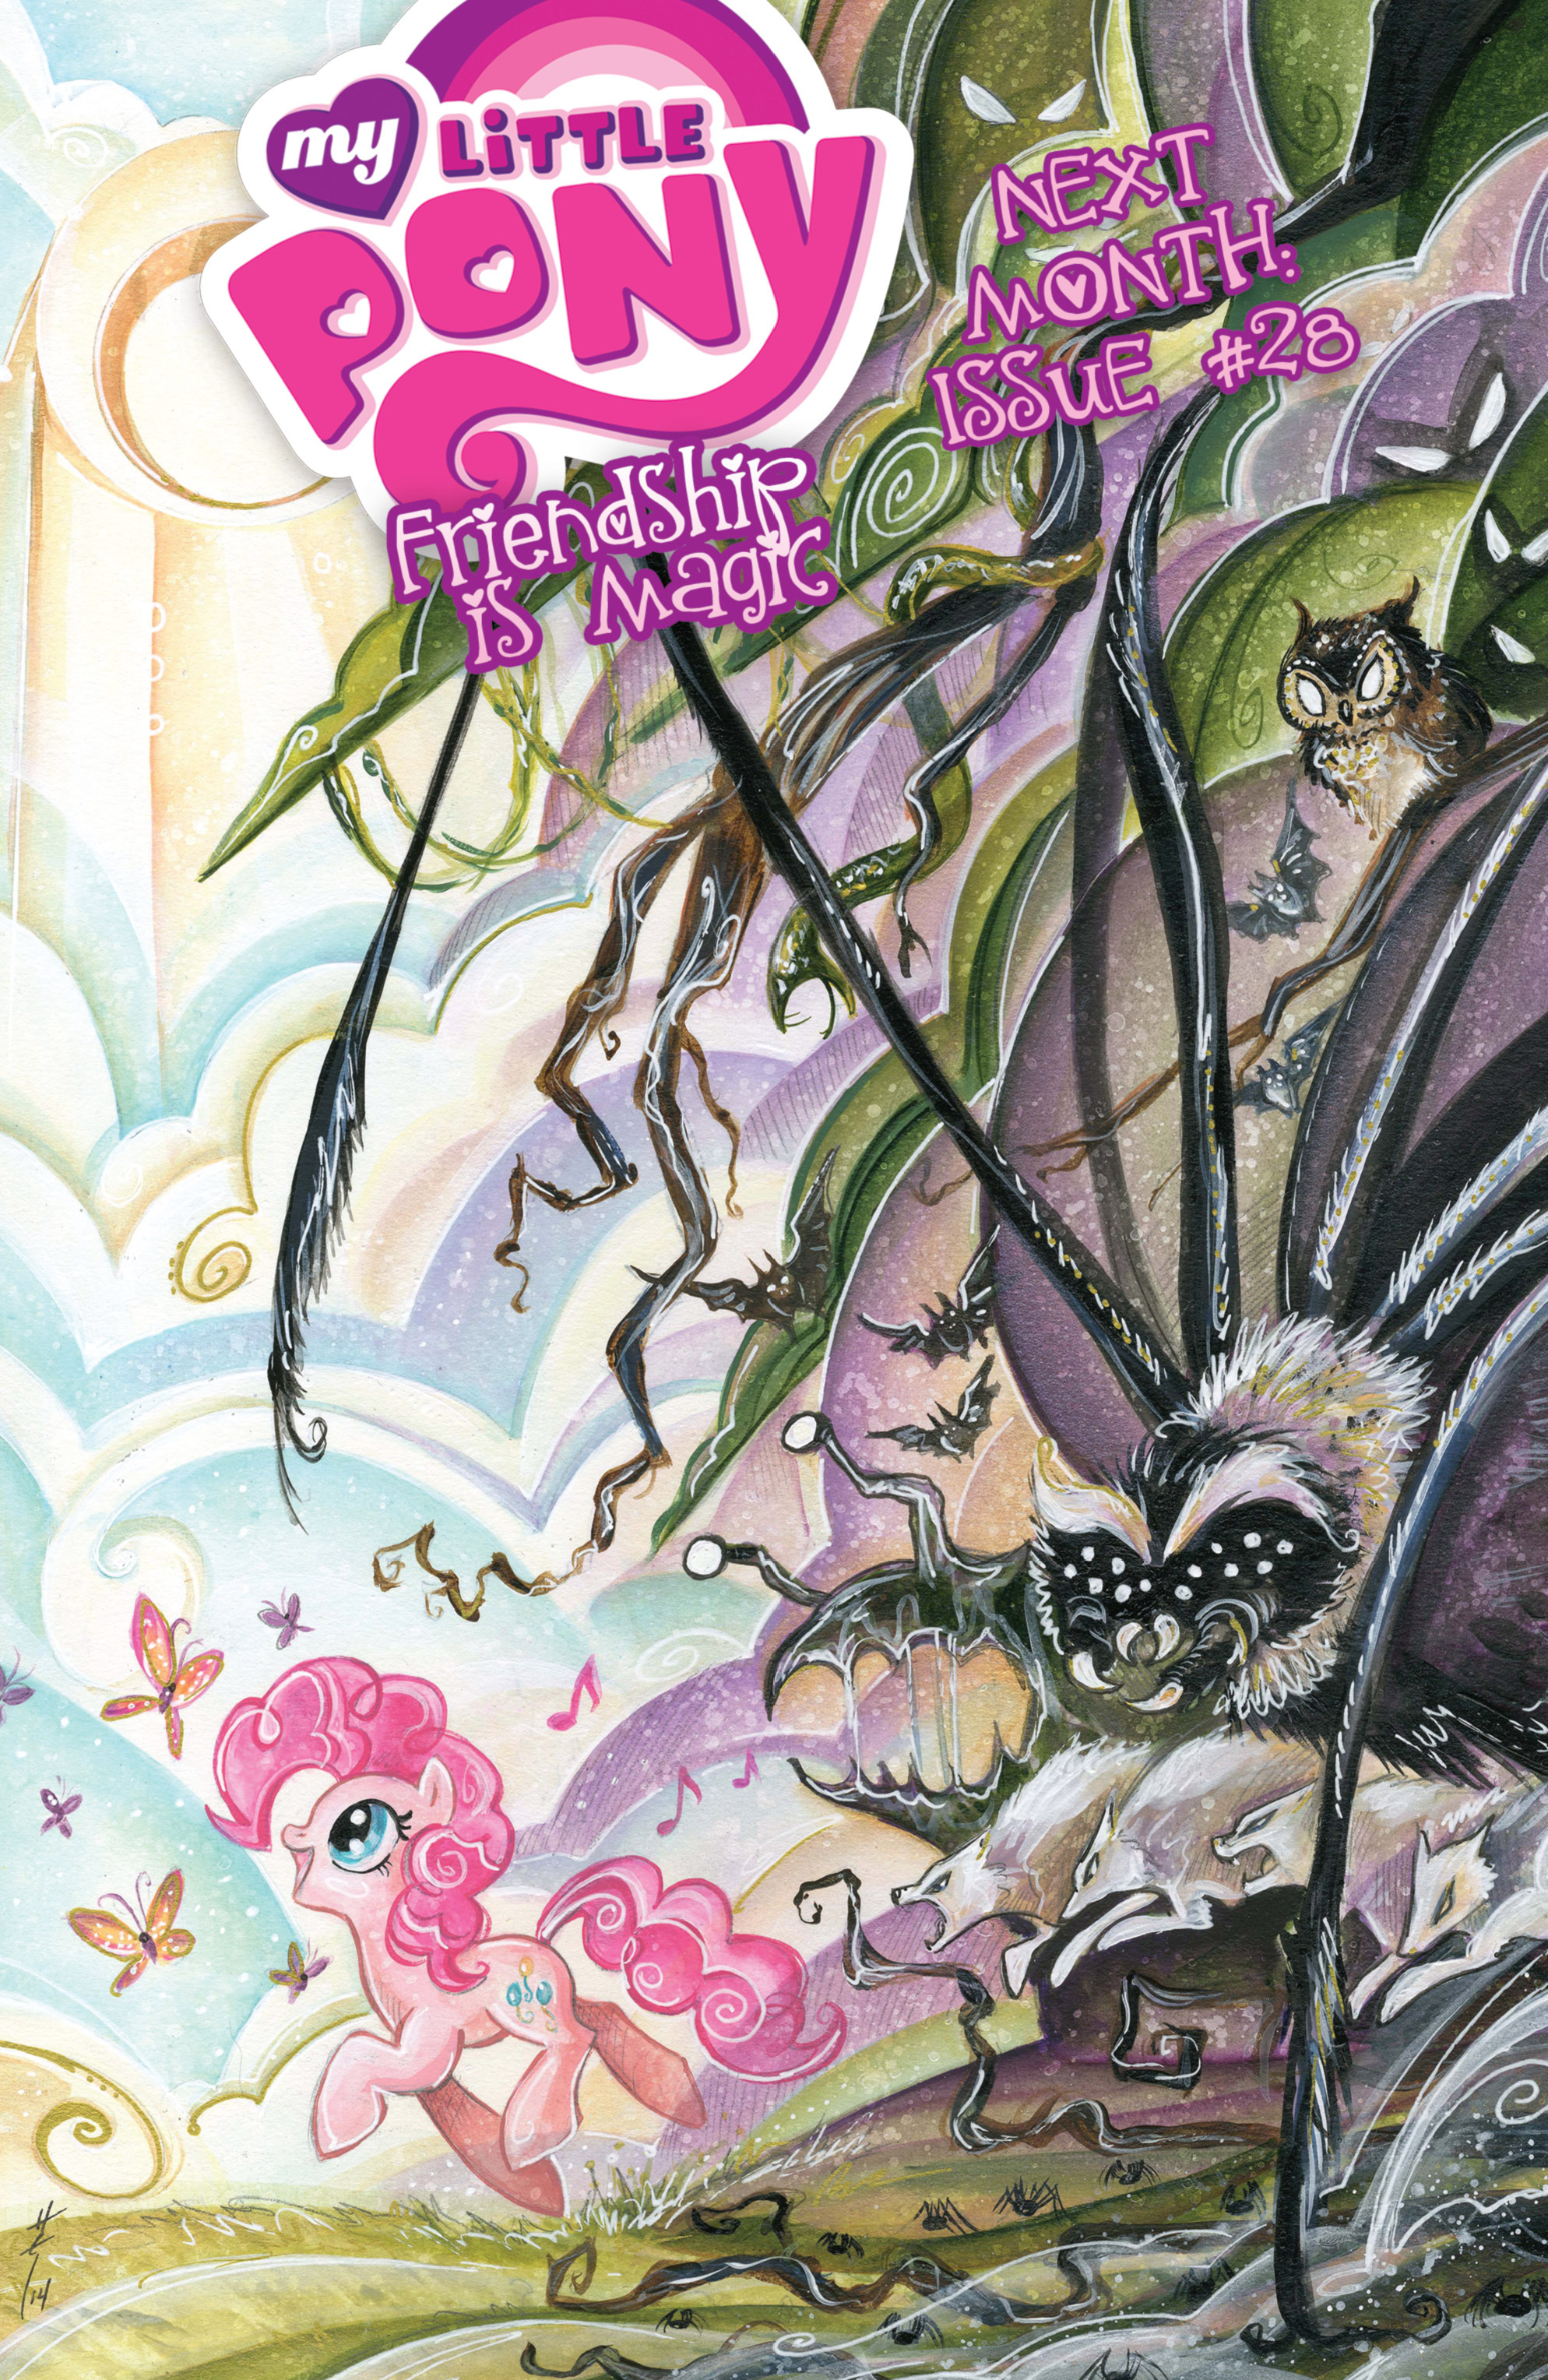 Read online My Little Pony: Friendship is Magic comic -  Issue #27 - 26